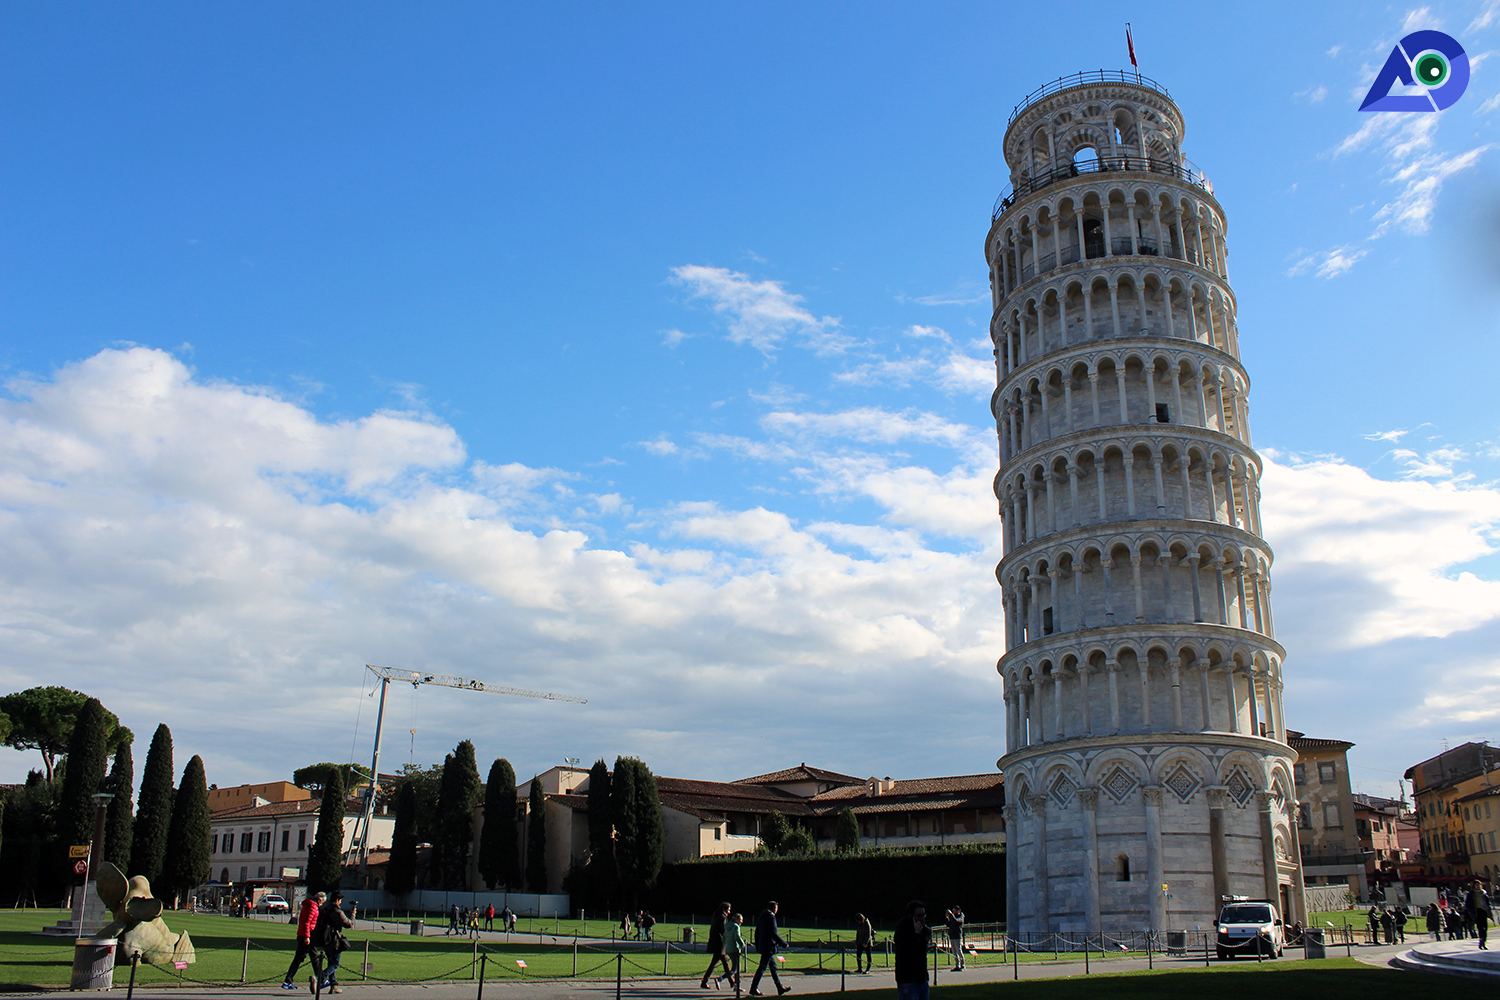 Day Trip To Pisa, Italy - The Complete Guide